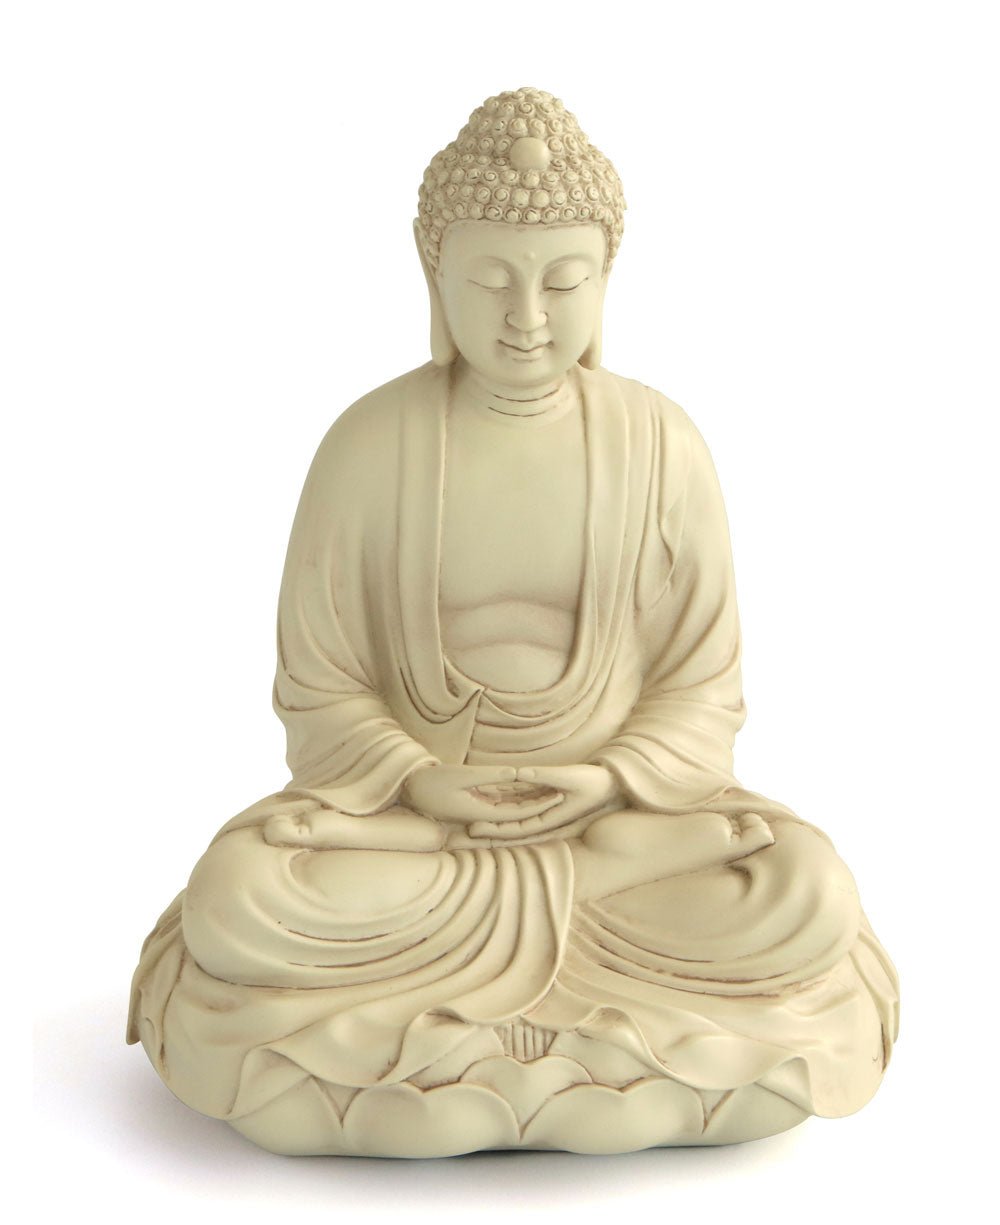 Meditating Buddha Statue on Lotus, Stone Finish, 11 Inches - Sculptures & Statues